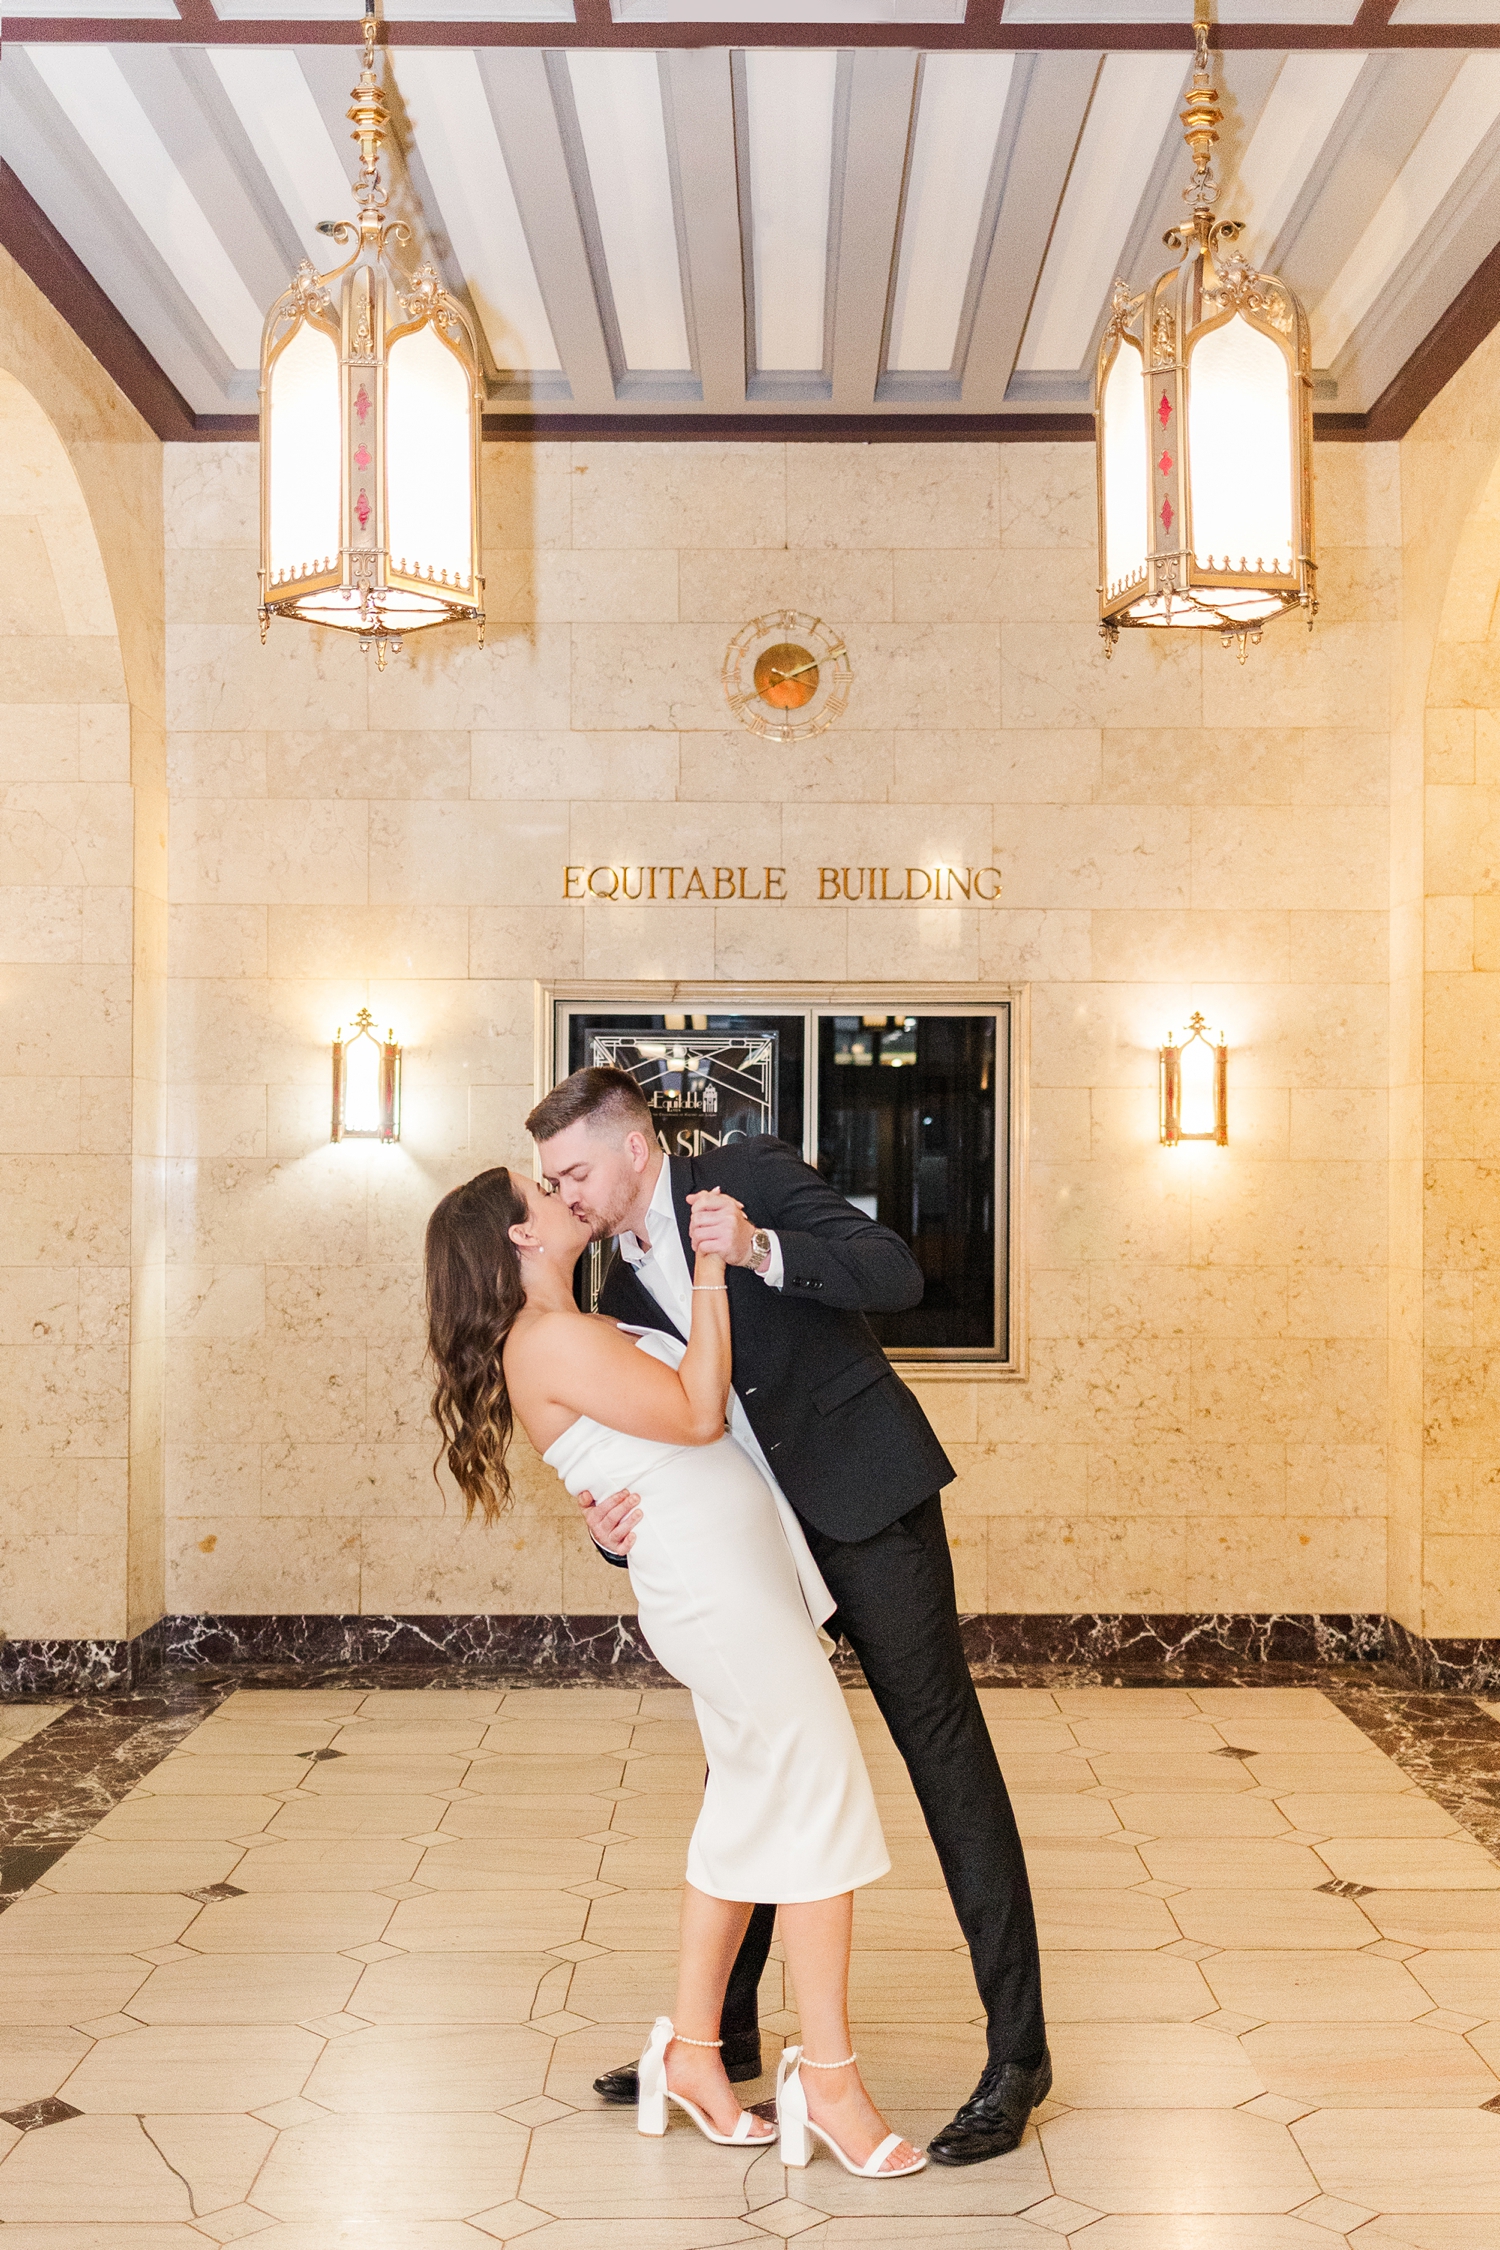 Dustin dips Jenna back for a kiss in the lobby entrance of The Equitable Building in Des Moines, IA | CB Studio